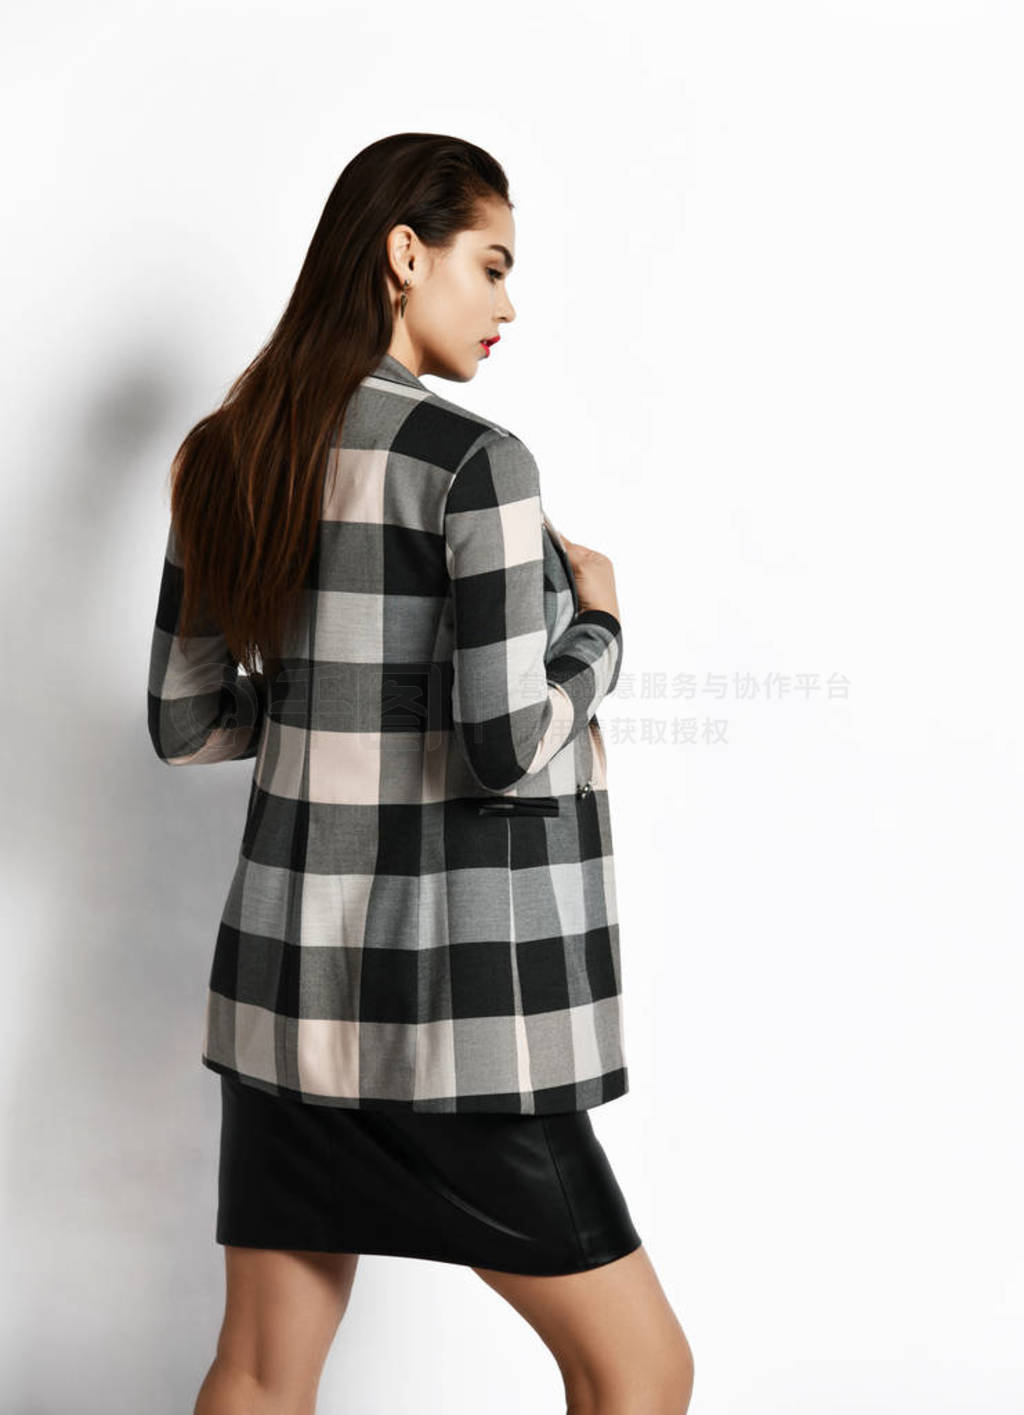 Young glamorous modern girl in a checkered jacket and black skir